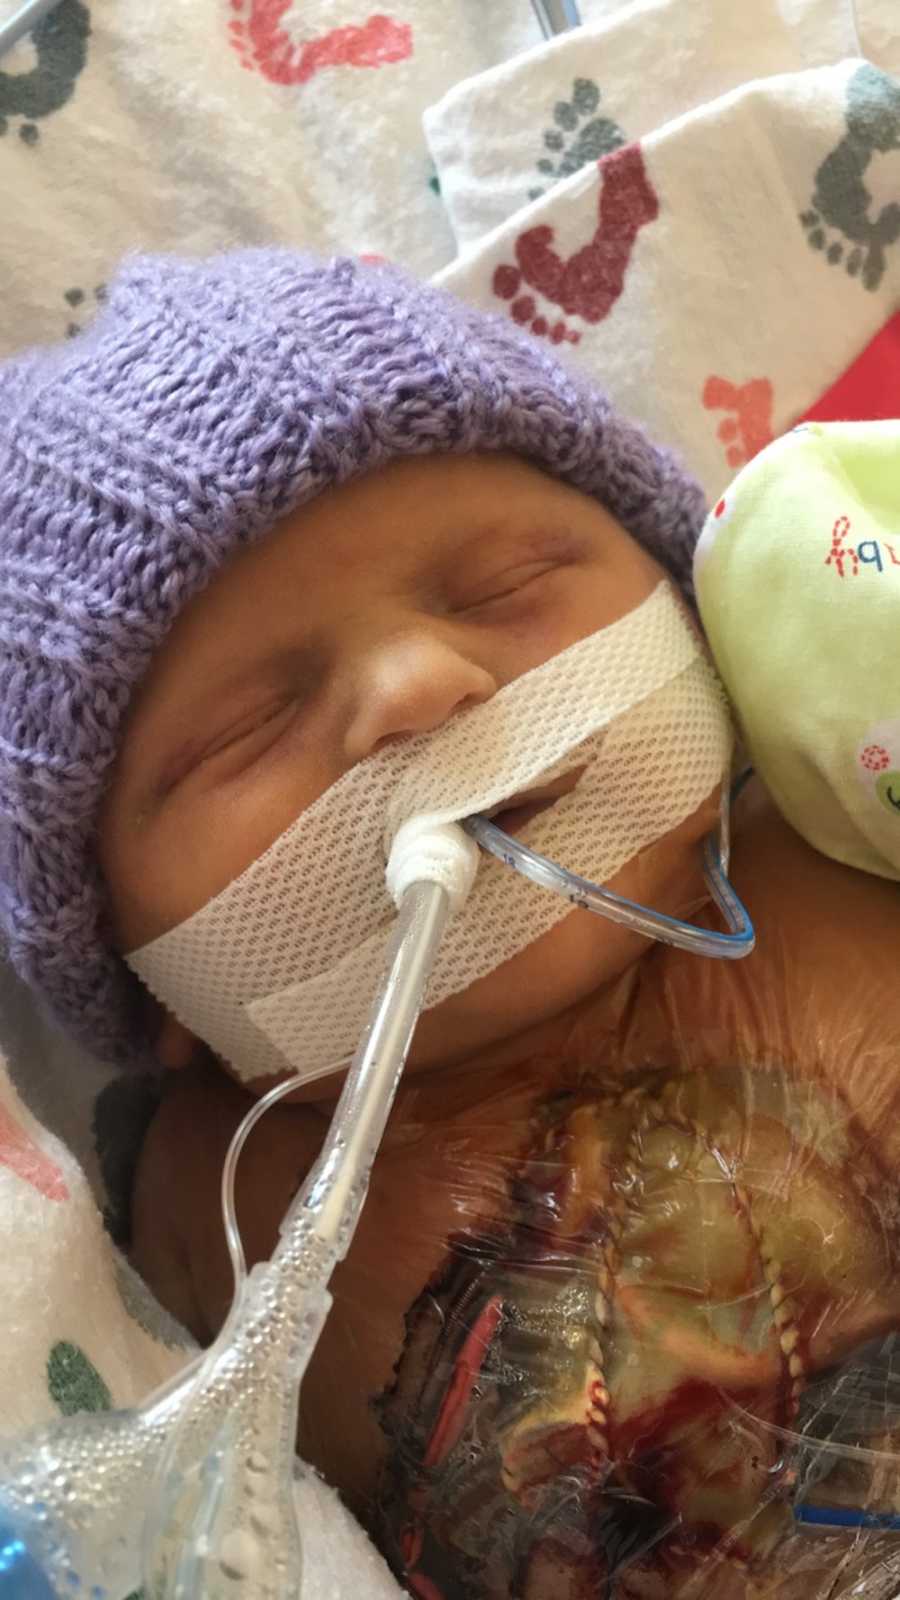 Newborn lays asleep in NICU wearing purple hat and tube taped to her mouth with wound on her chest